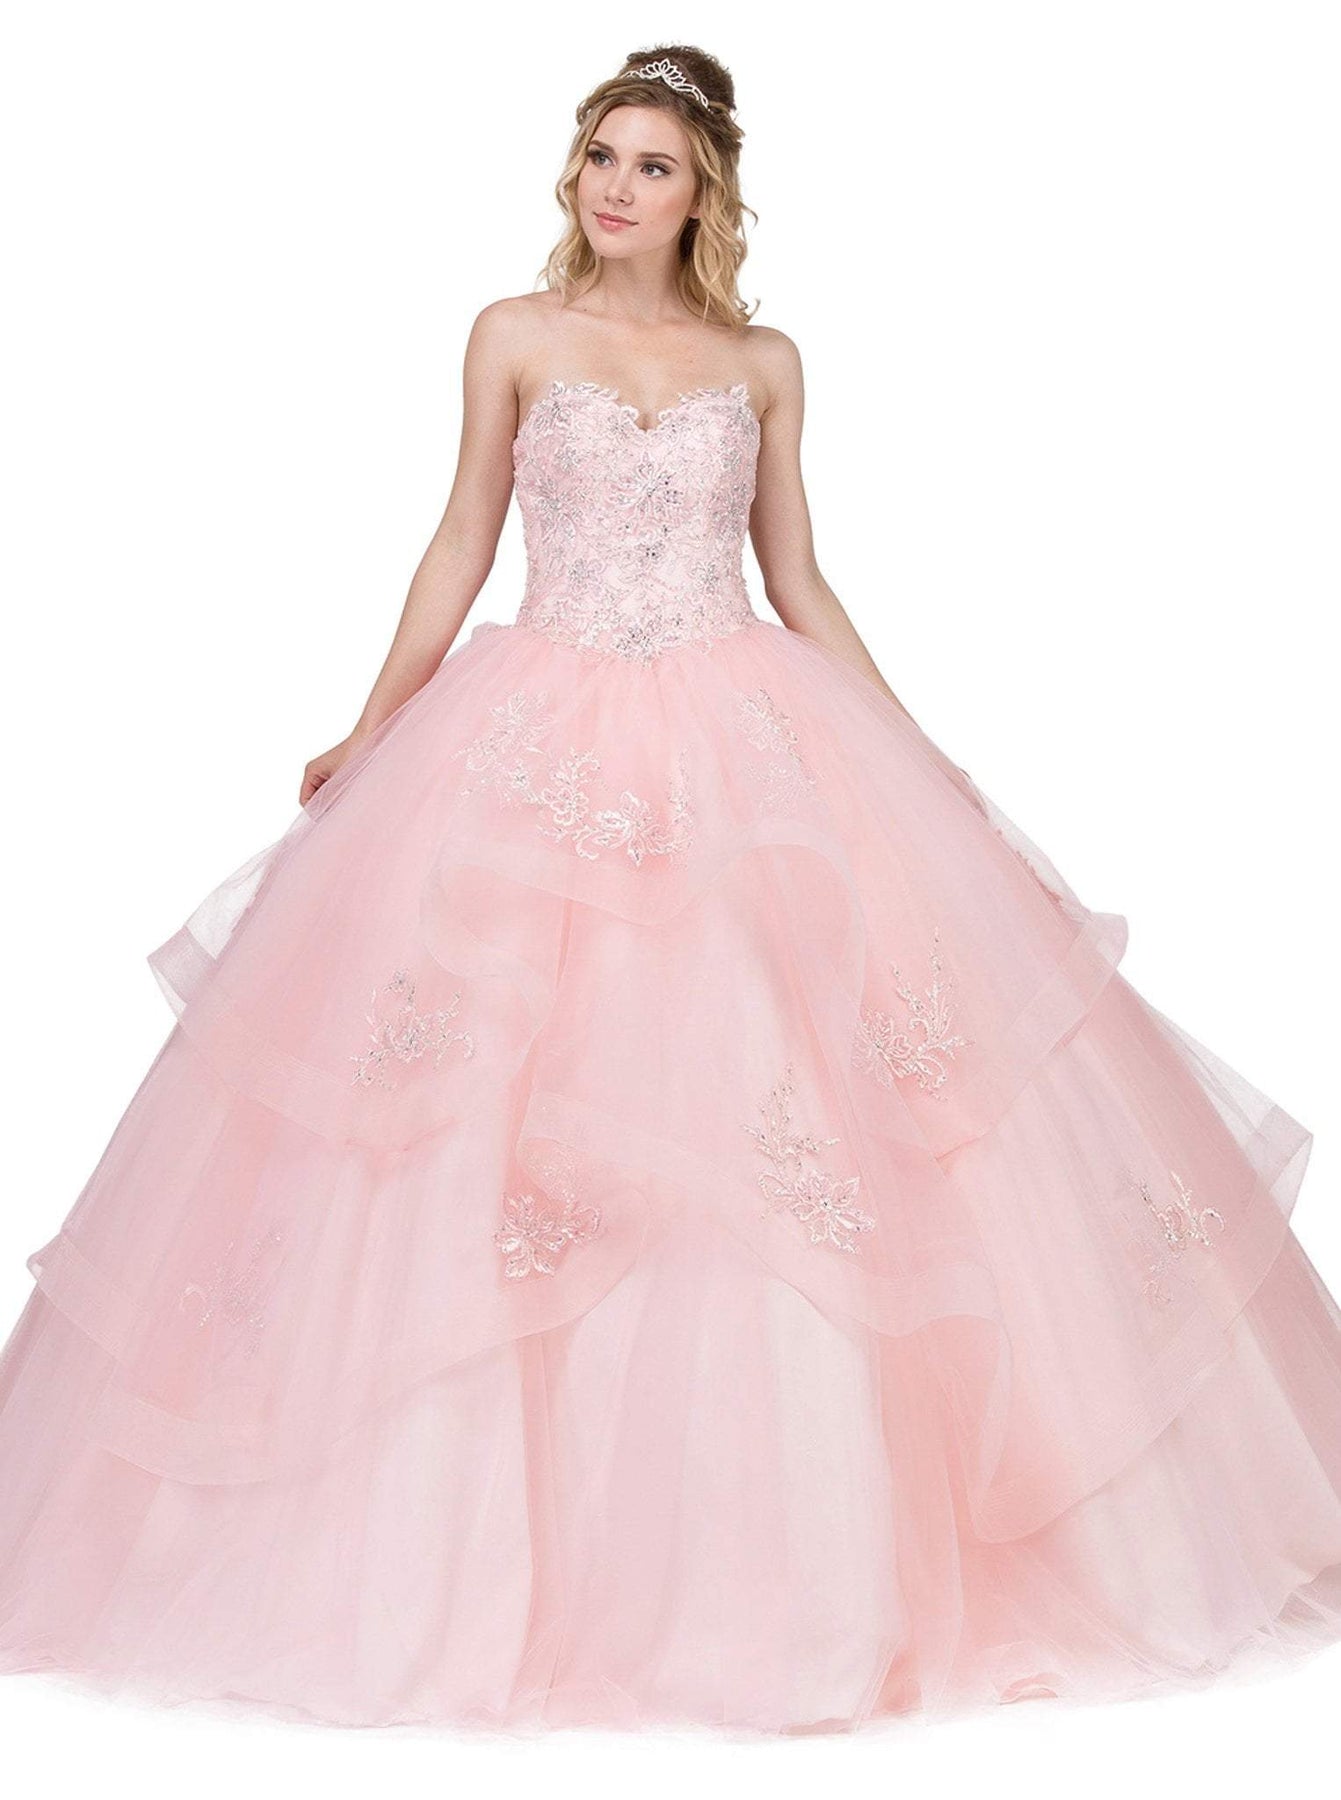 Dancing Queen - 1328 Strapless Embellished Sweetheart Ballgown Special Occasion Dress XS / Blush